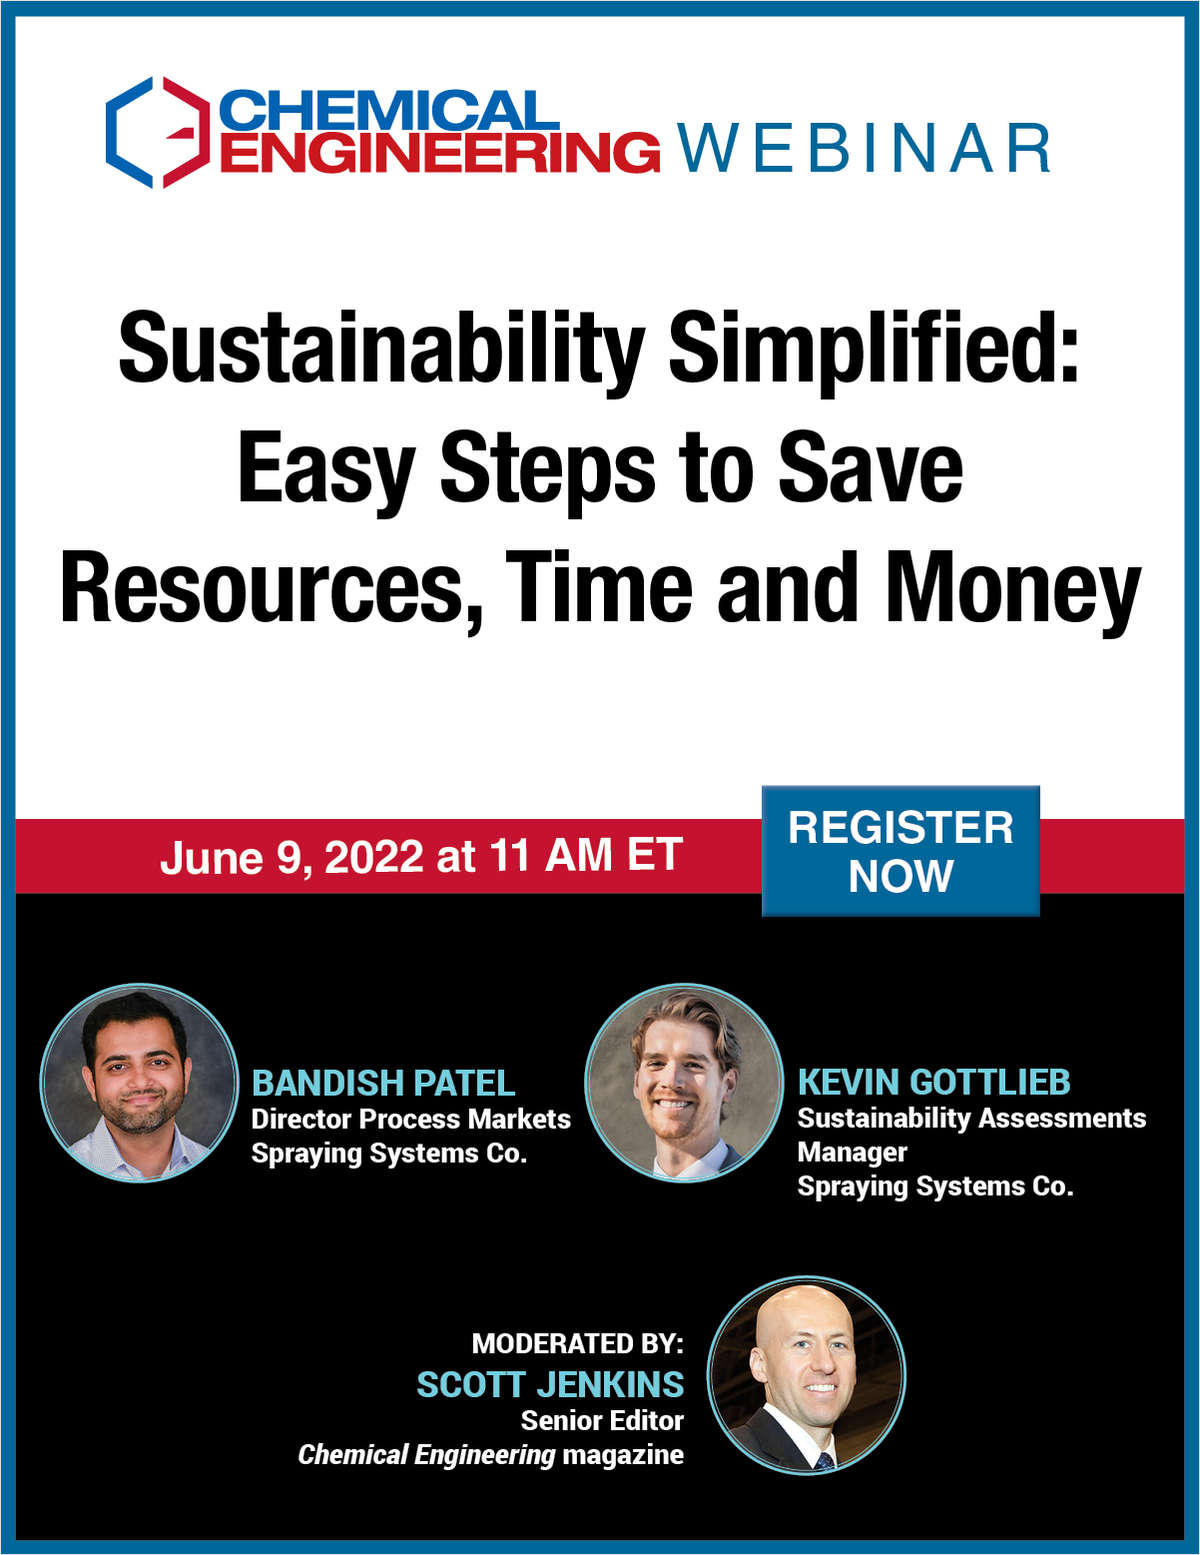 Sustainability Simplified: Easy Steps to Save Resources, Time and Money